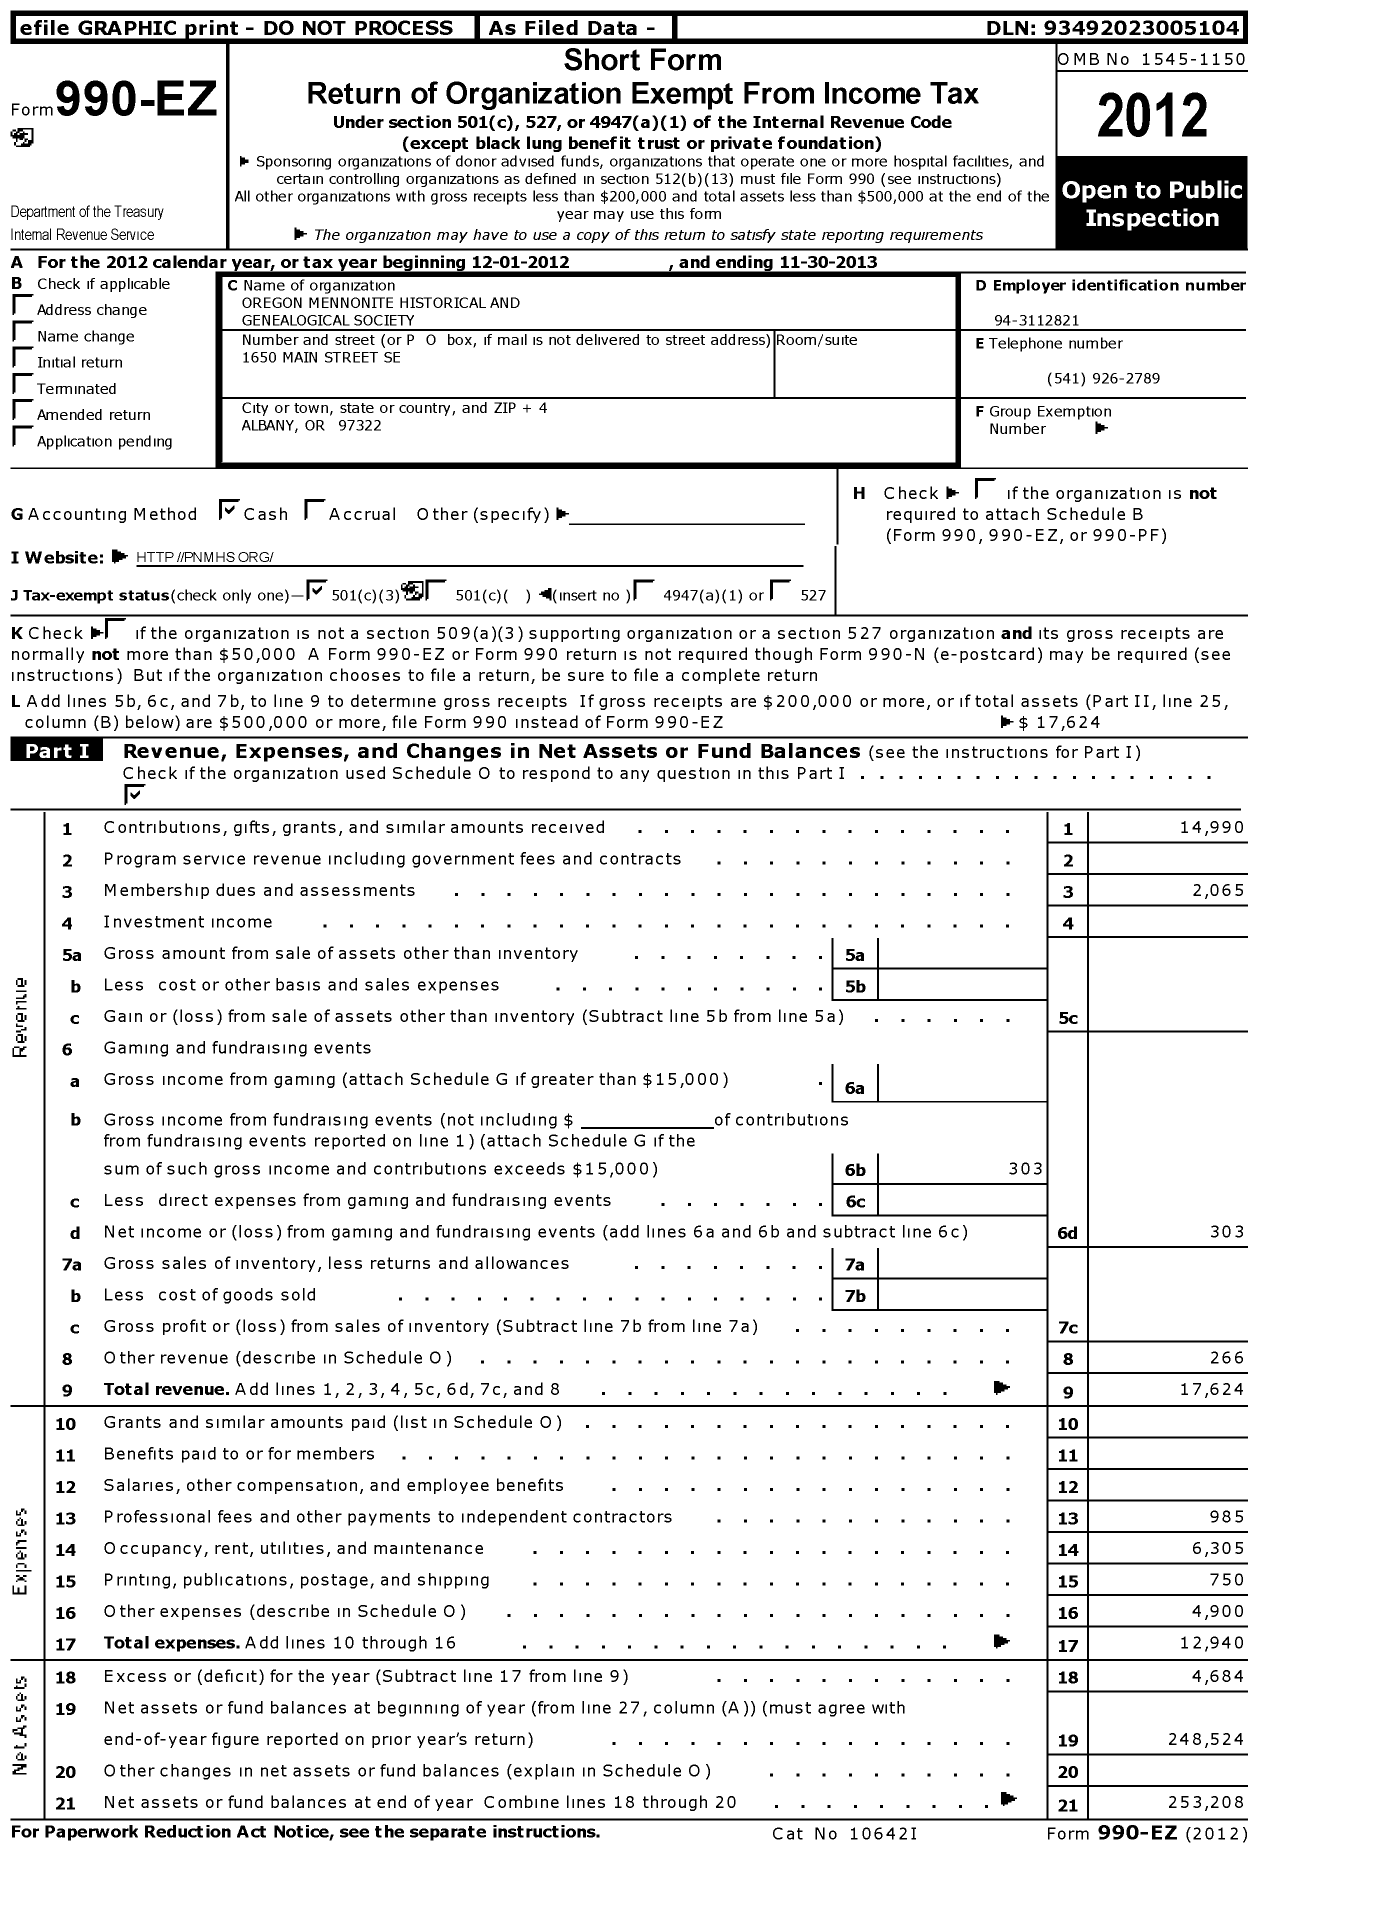 Image of first page of 2012 Form 990EZ for Oregon Mennonite Historical and Genealogical Society